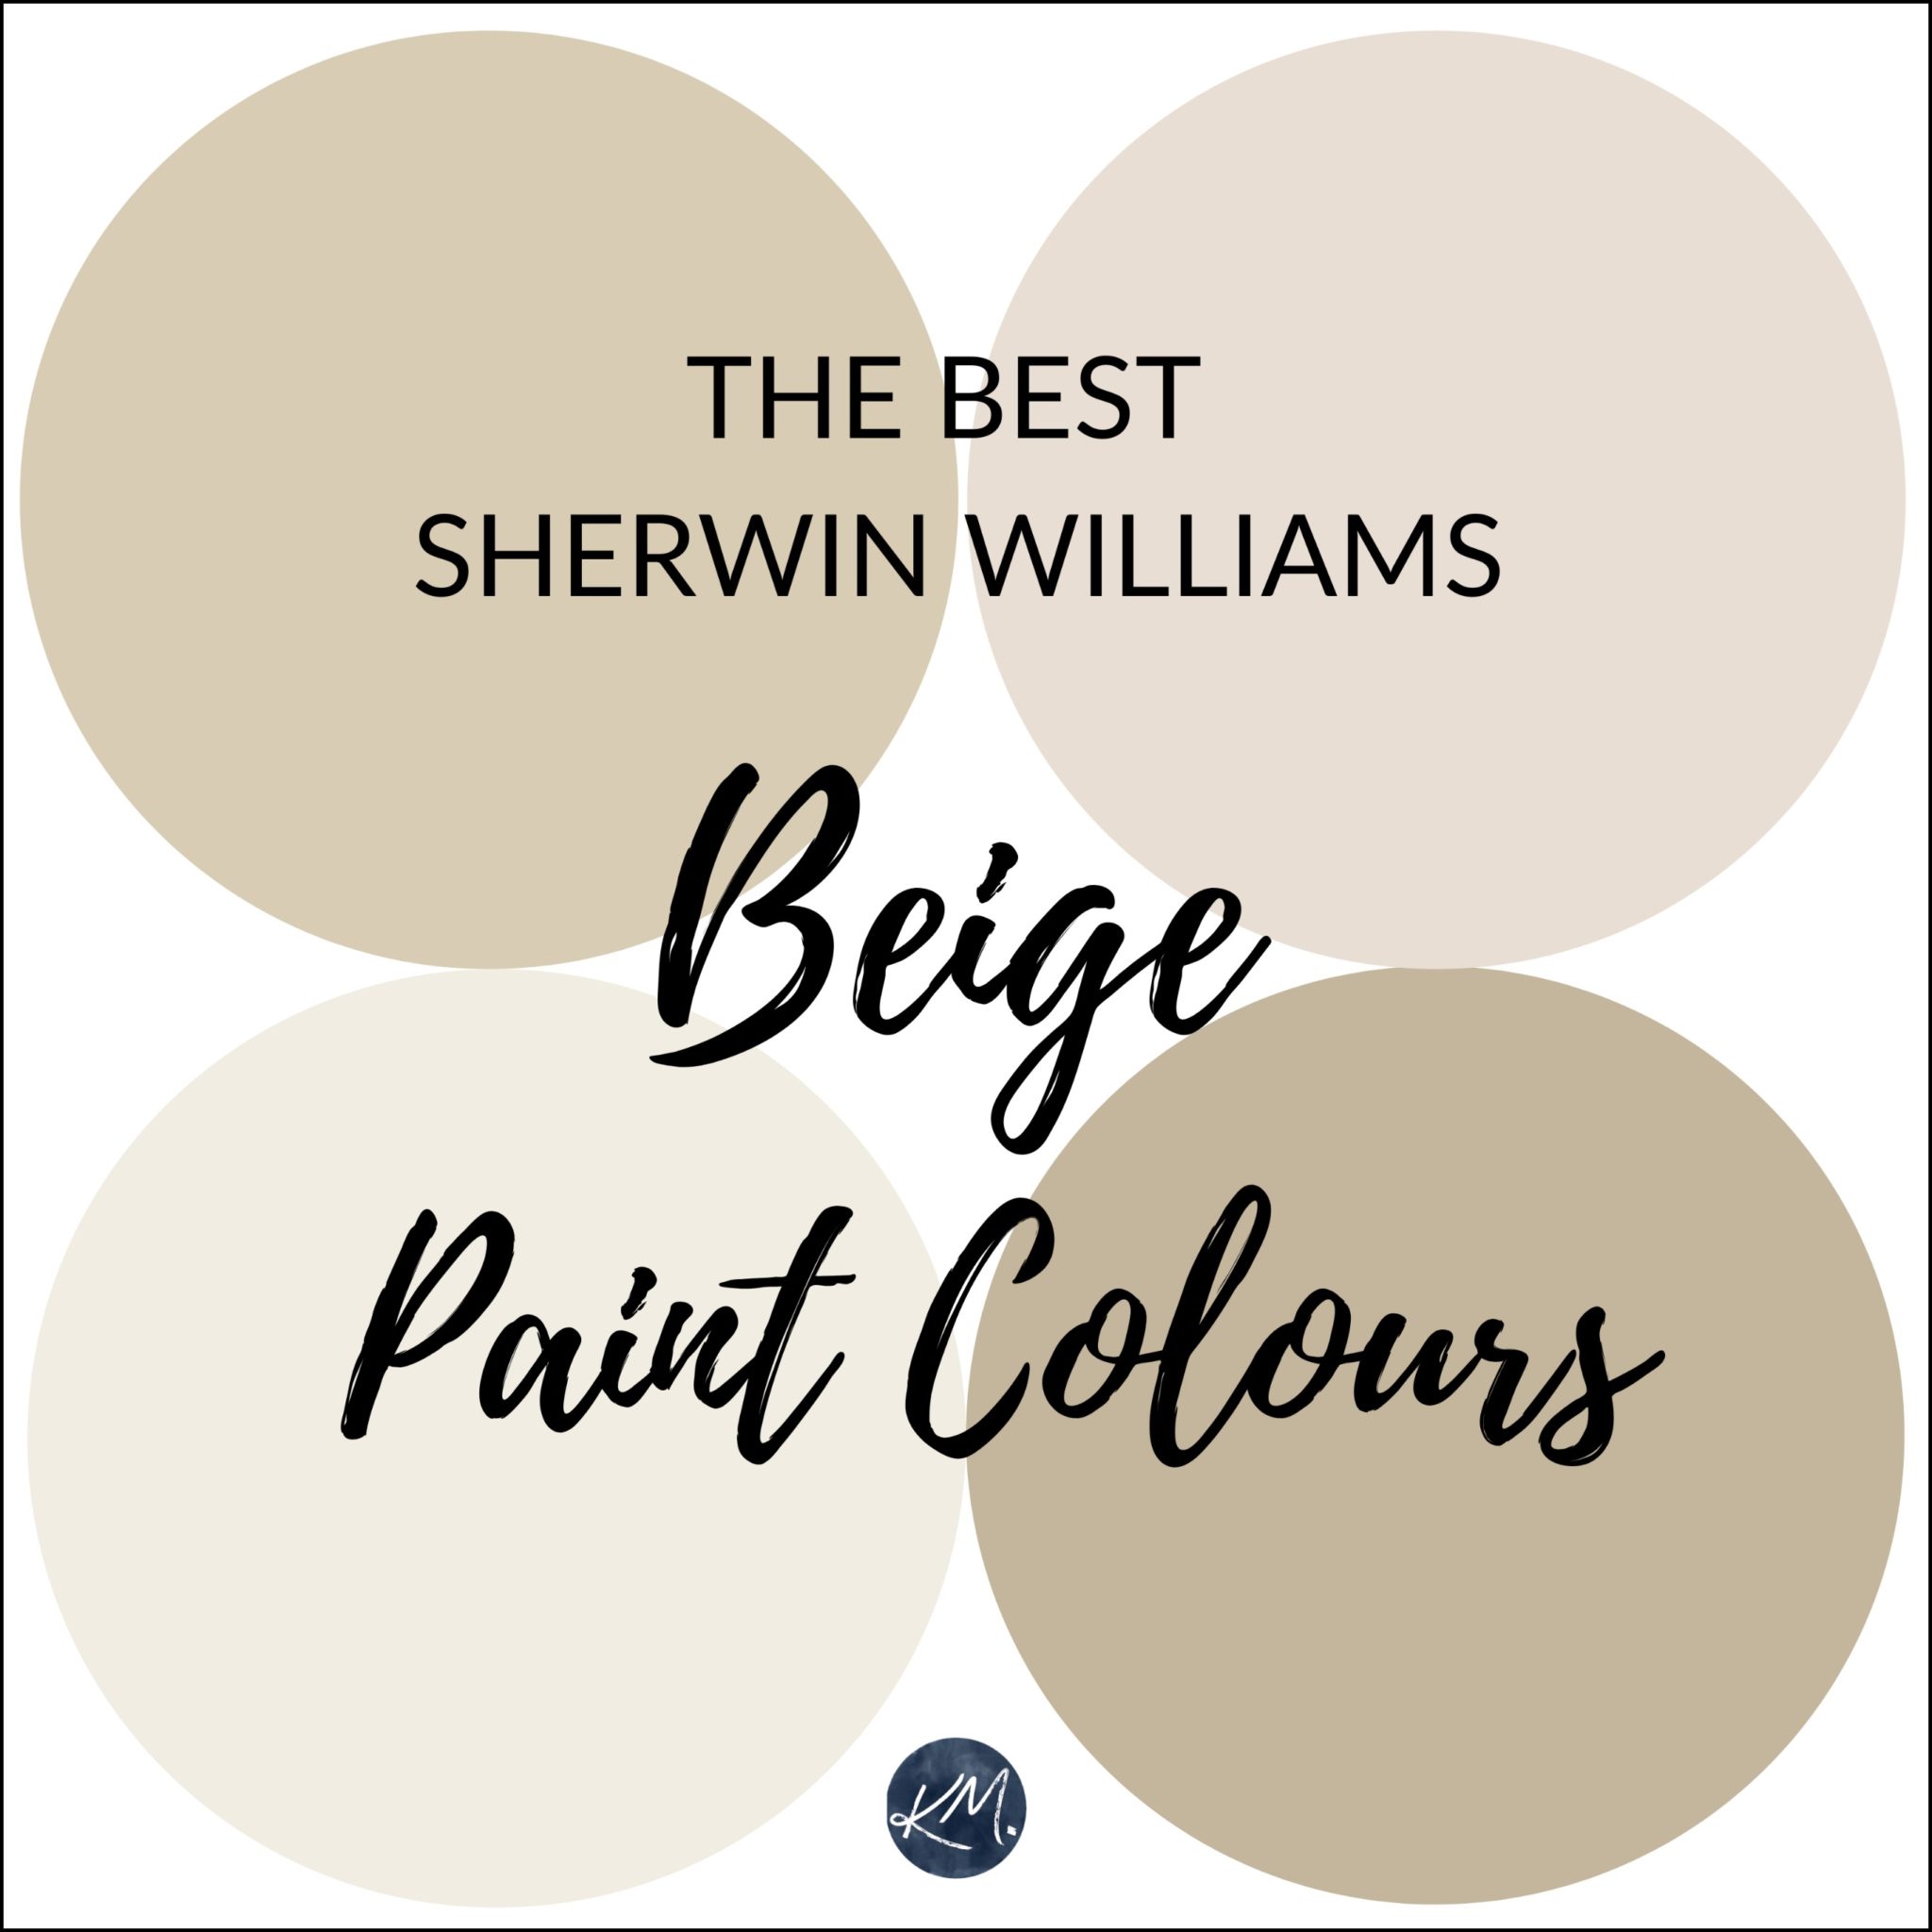 Sherwin Williams 5 Best Neutral Beige Paint Colors (with a BIT more